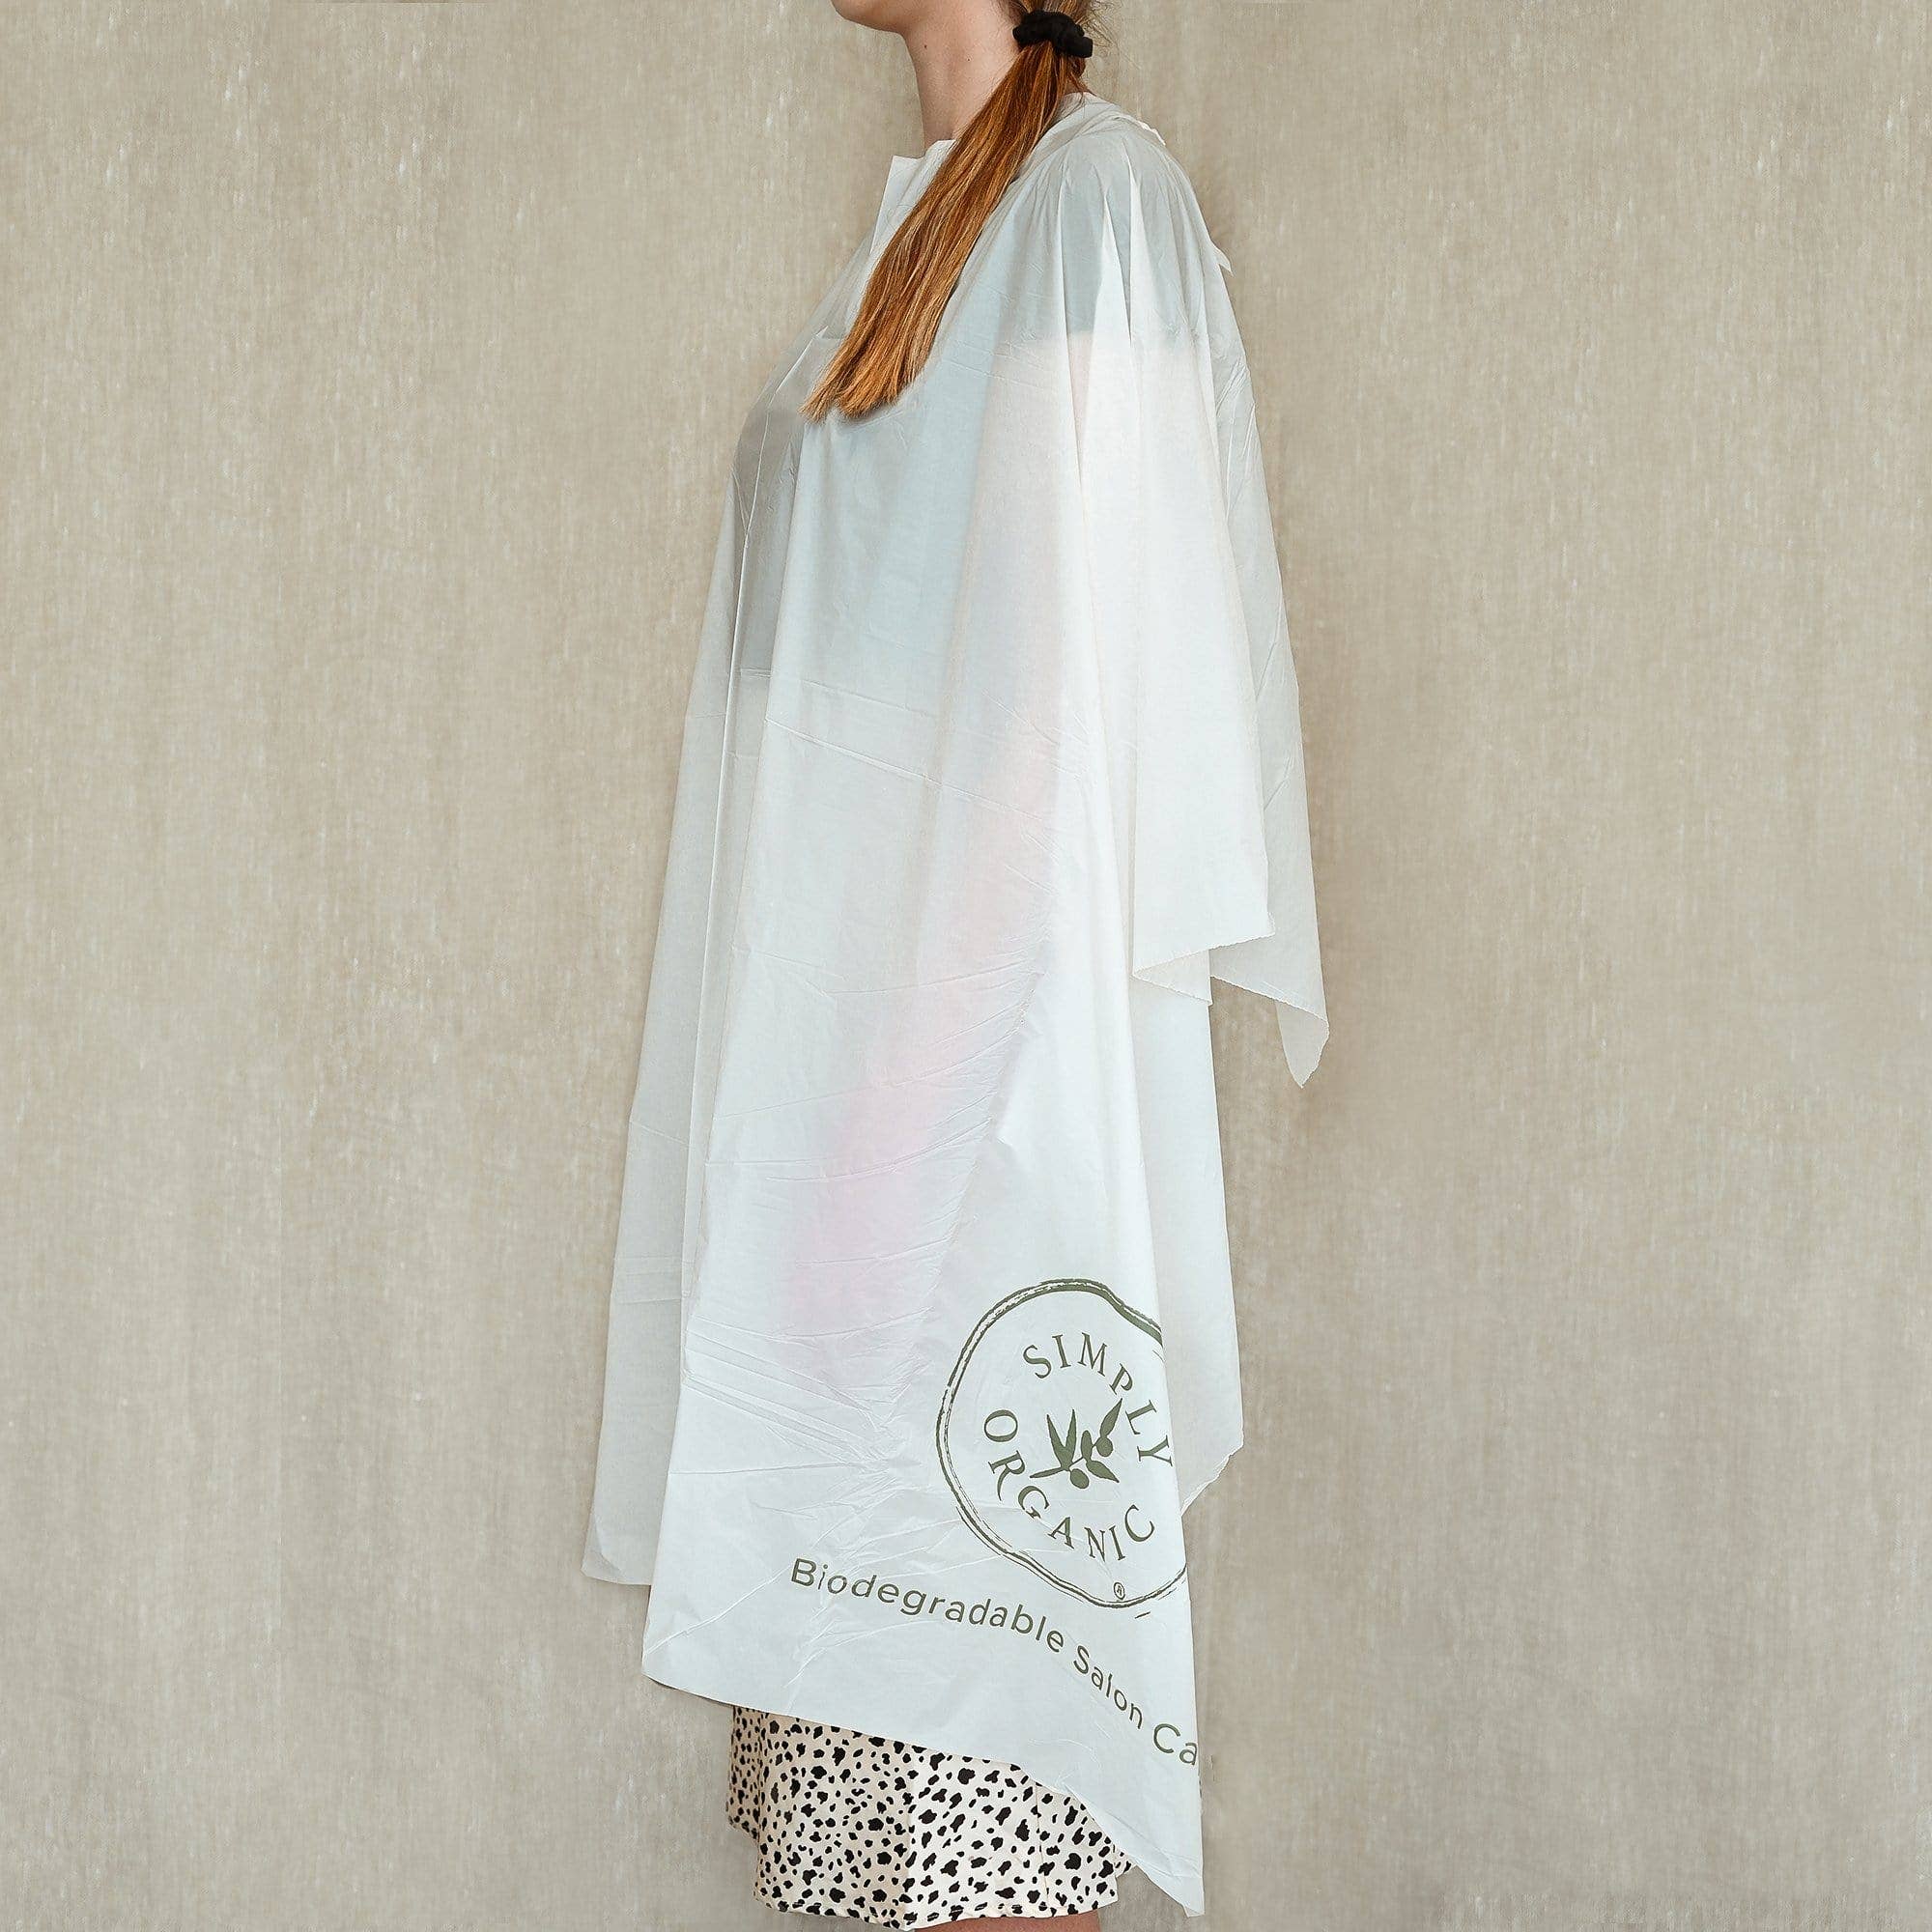 white salon cape,white hair cutting cape, salon cape, hair cutting apparel, hair  cutting cape, waterproof hair cape, salon apparel, salon wear, spa  uniforms,cosmetology smocks,capes,apron aprons,hairstylist clothing,  hairdresser apron, capes,smocks